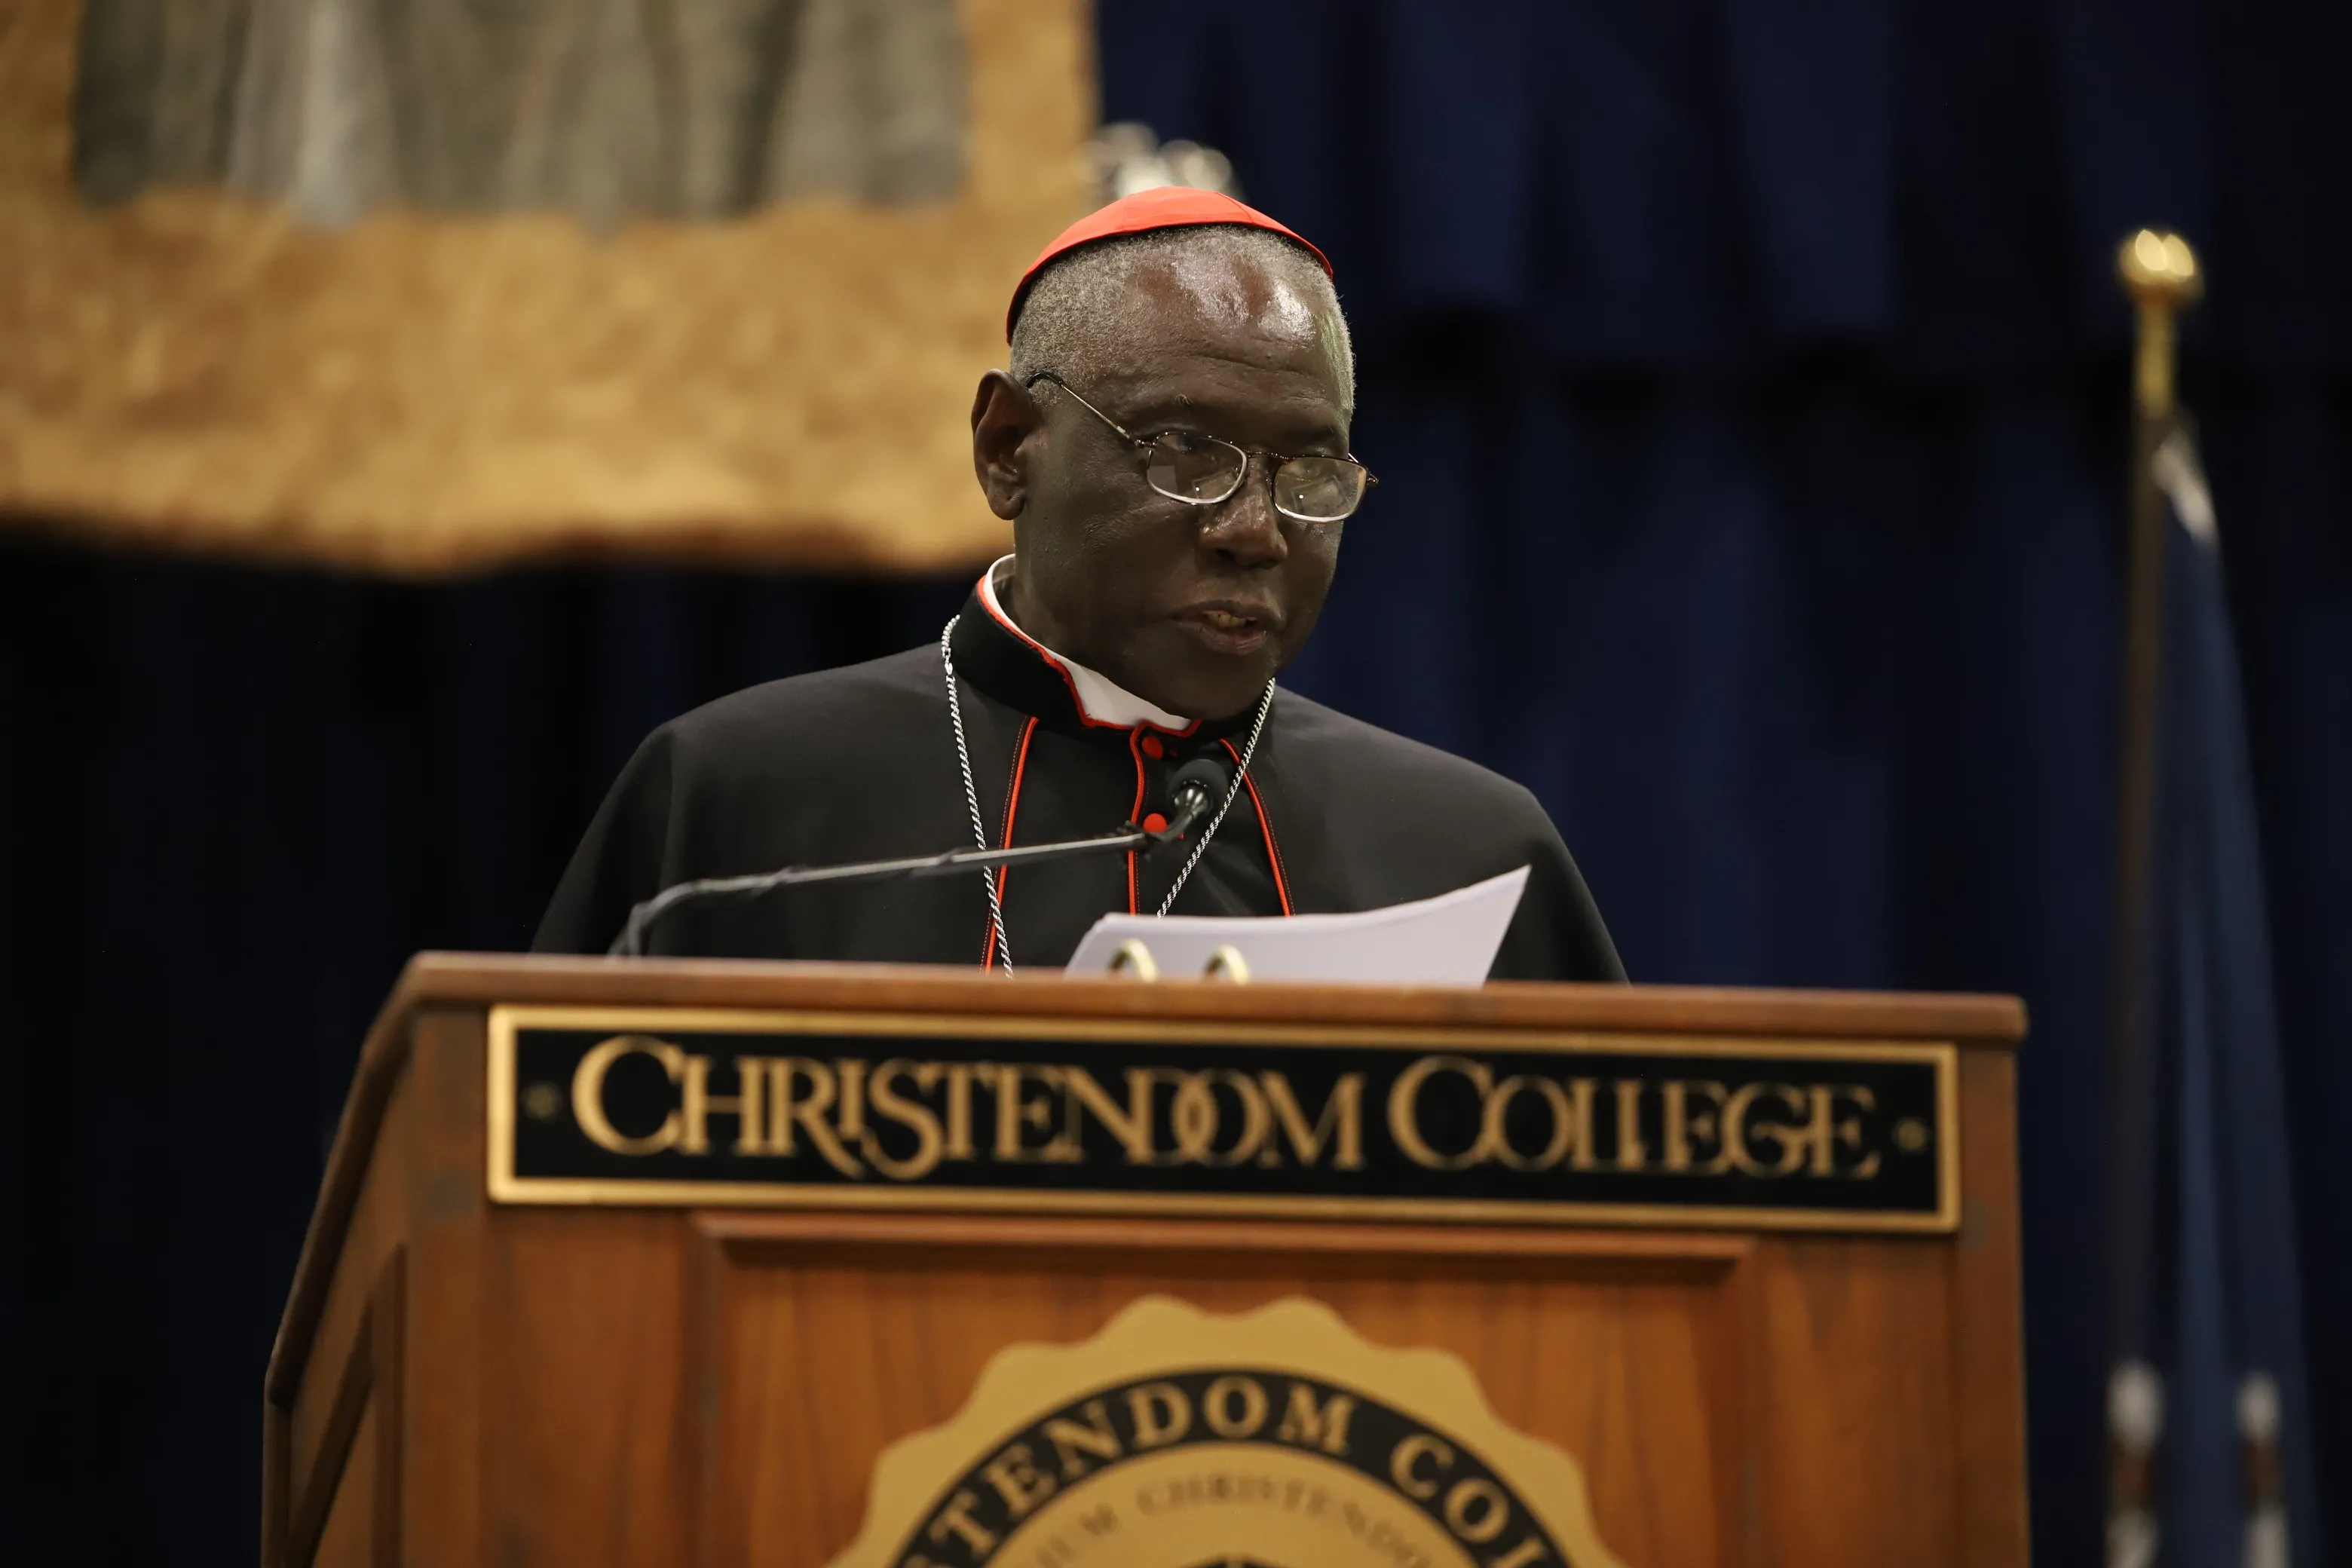 Cardinal Robert Sarah, Prefect Emeritus of the Congregation for Divine Worship, delivers the commencement address at Christendom College in Front Royal, Va., May 14, 2022.?w=200&h=150